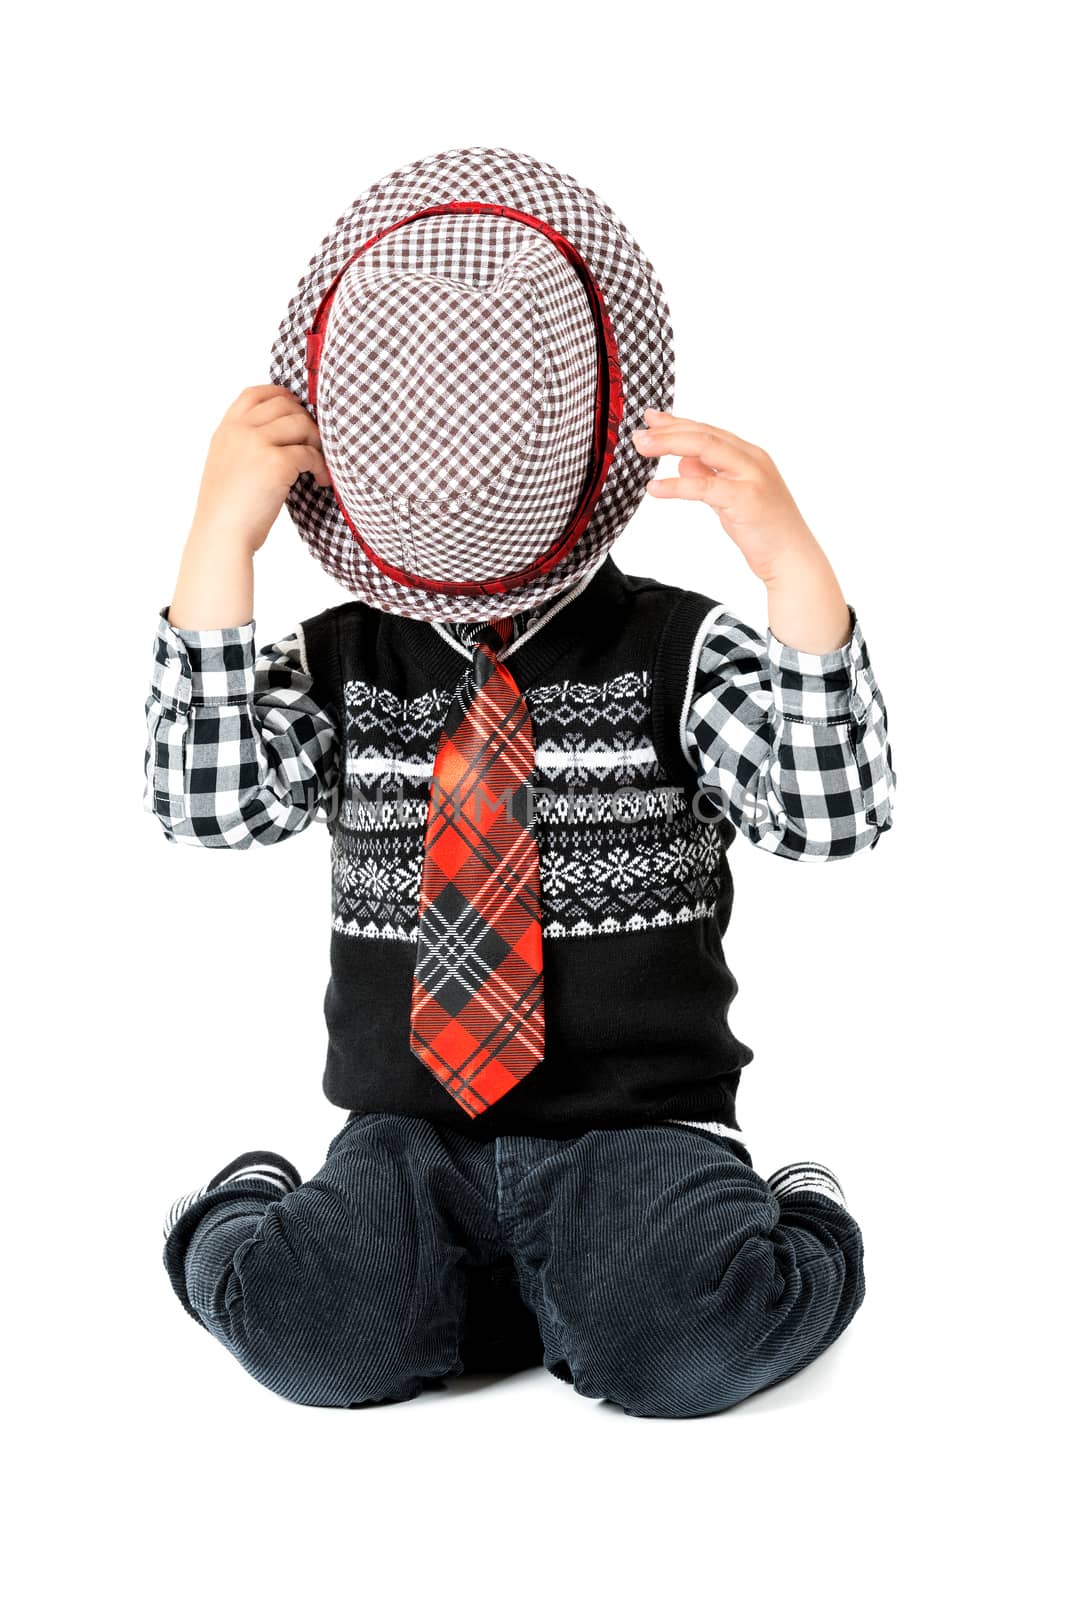 Boy with hat and tie studio shot isolated on a white background by Nanisimova